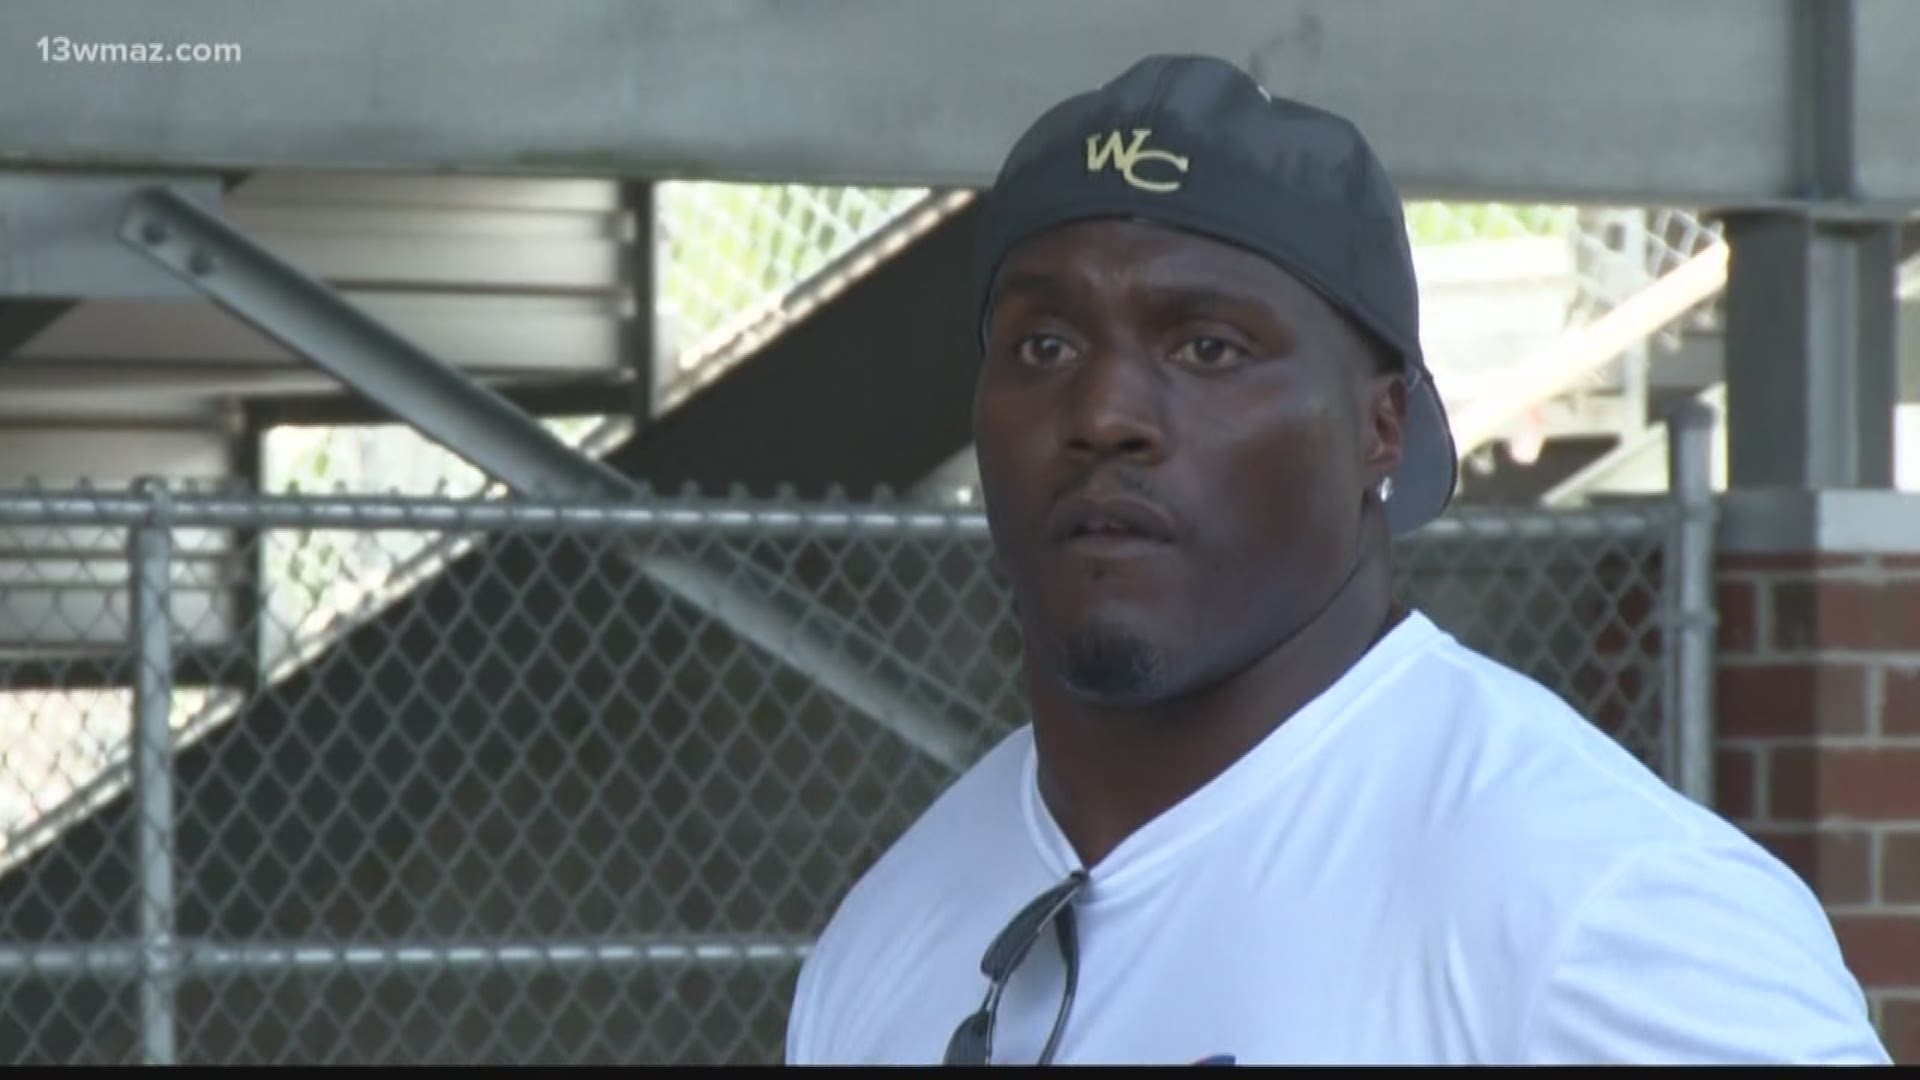 Sandersville native and 15-year NFL veteran, Takeo Spikes is trying to pave the way for younger athletes by teaching and inspiring them to do their best on the field.